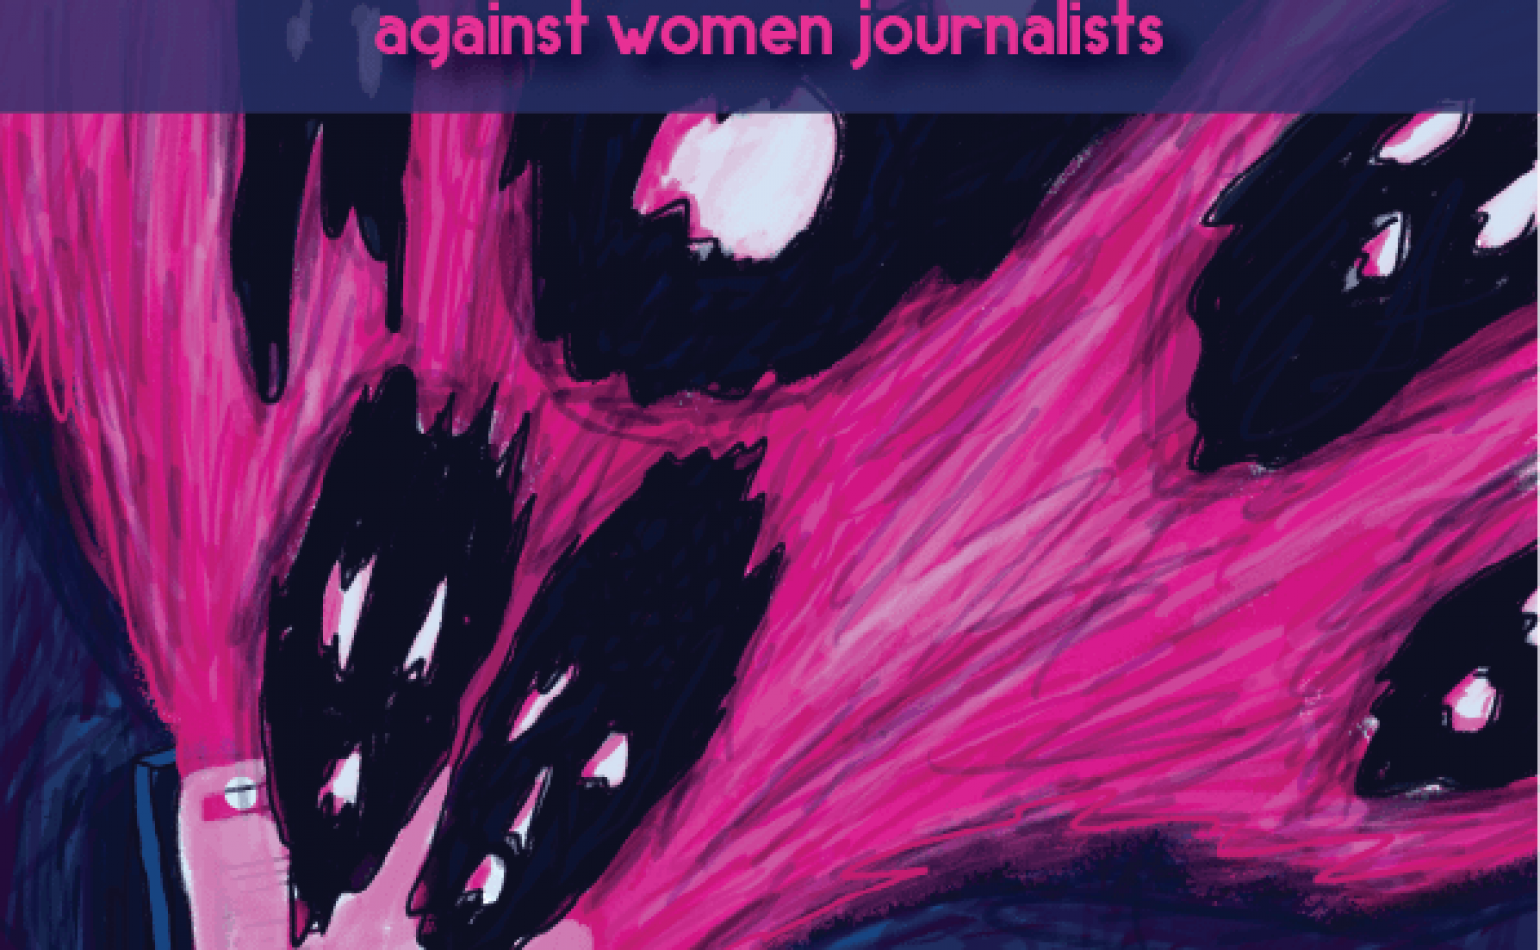 Media Matters for Democracy launches ‘Hostile Bytes’, a study of online violence against women journalists